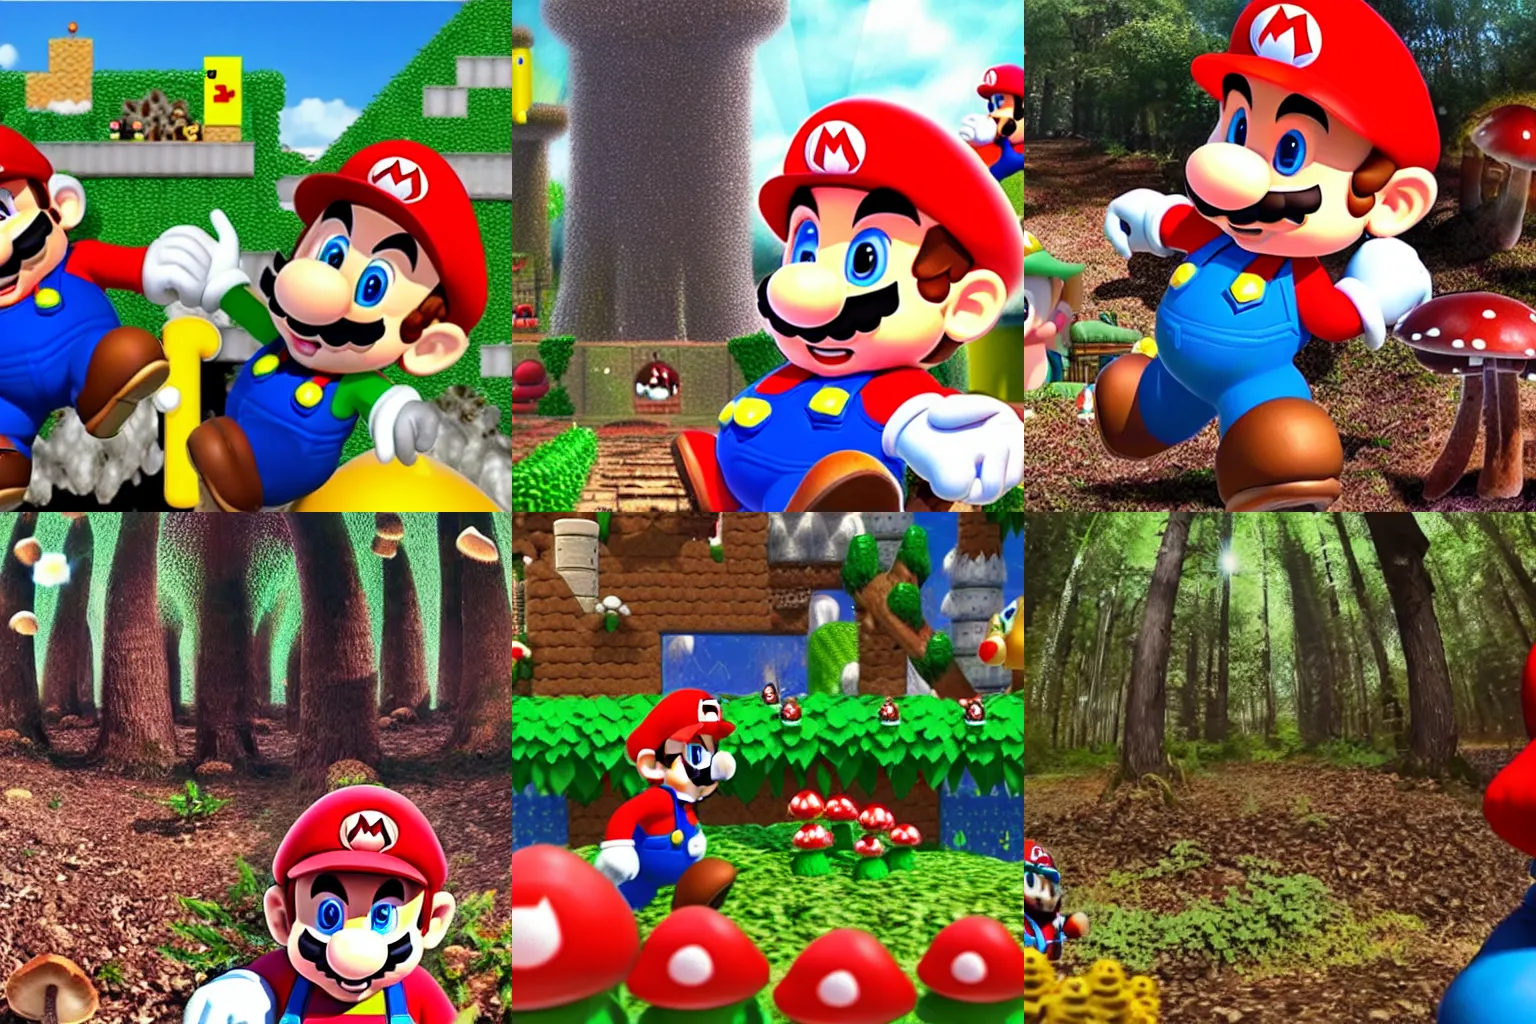 Prompt: GoPro footage of super Mario running through a nuclear forest full of mushrooms